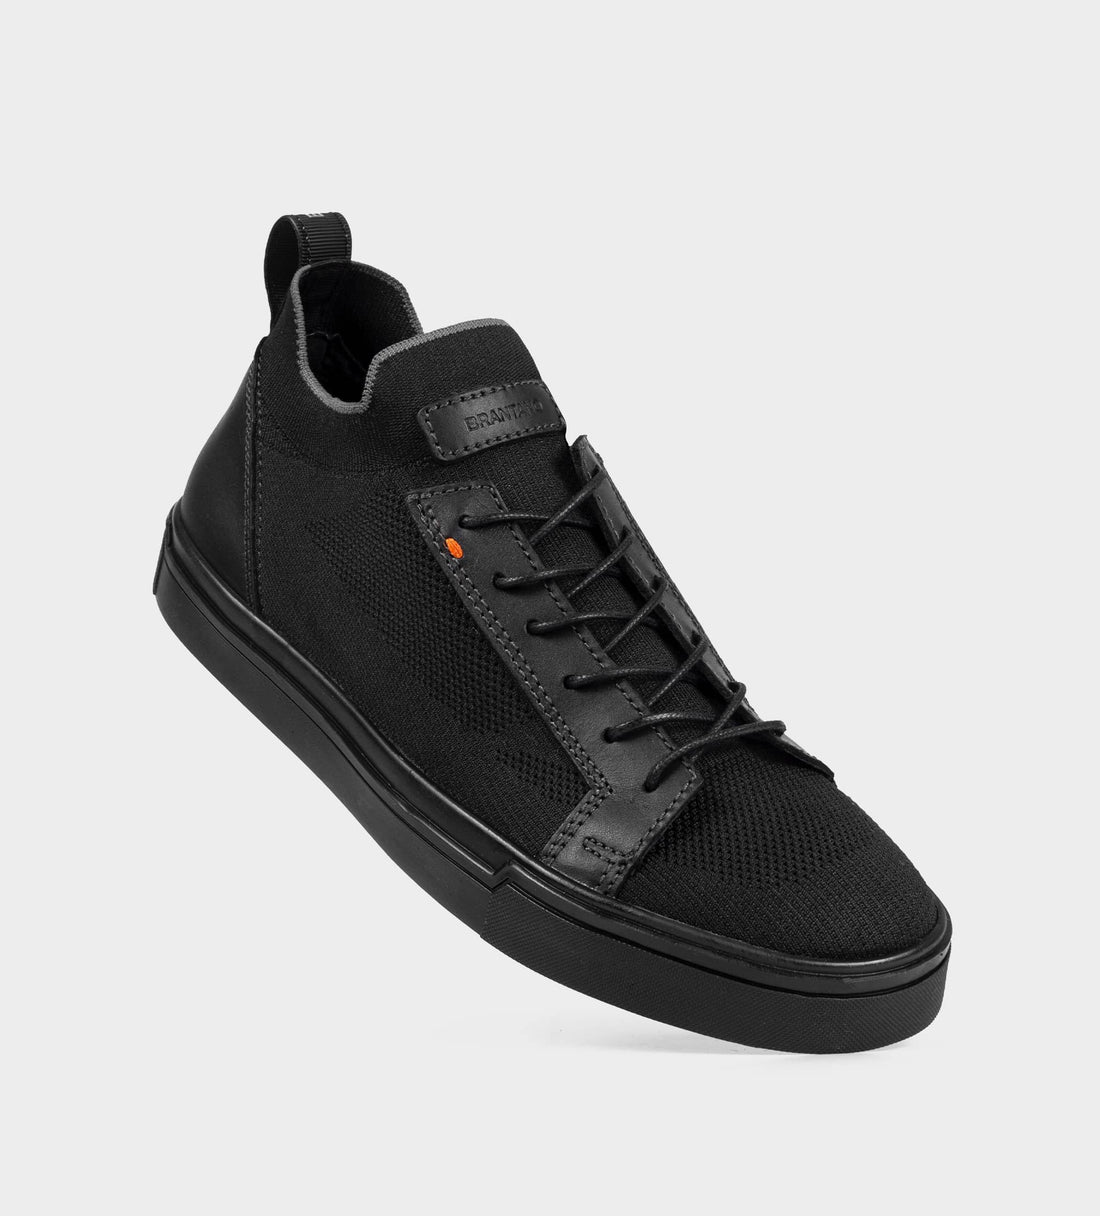 SNEAKERS CASUAL TEXTIL NEGRO